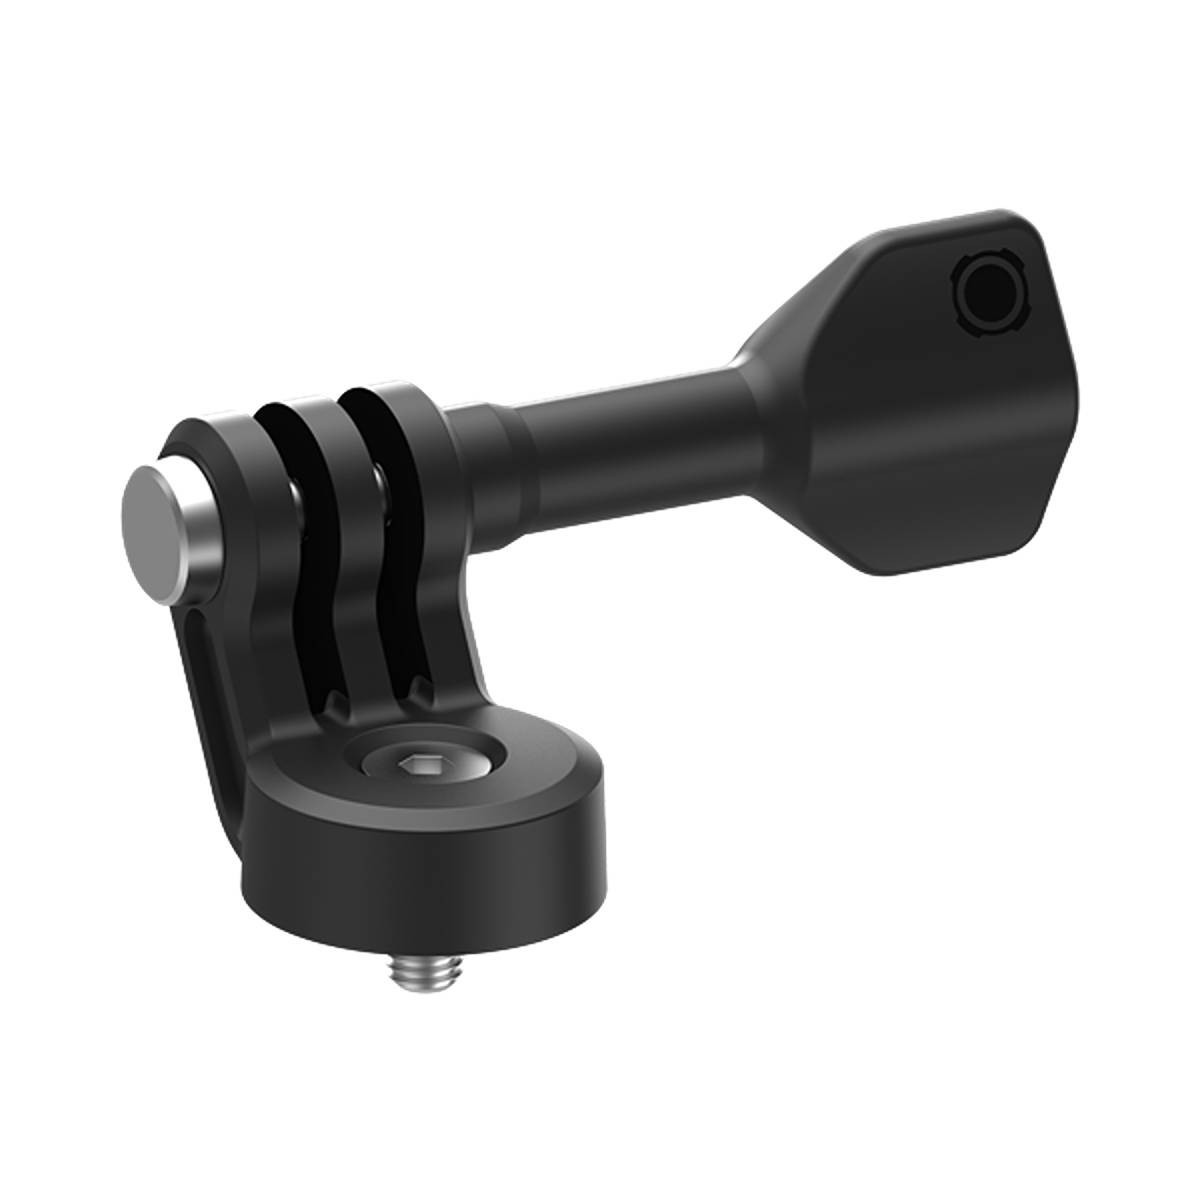 Quad Lock Replacement 360 To Gimbal Adapter Size